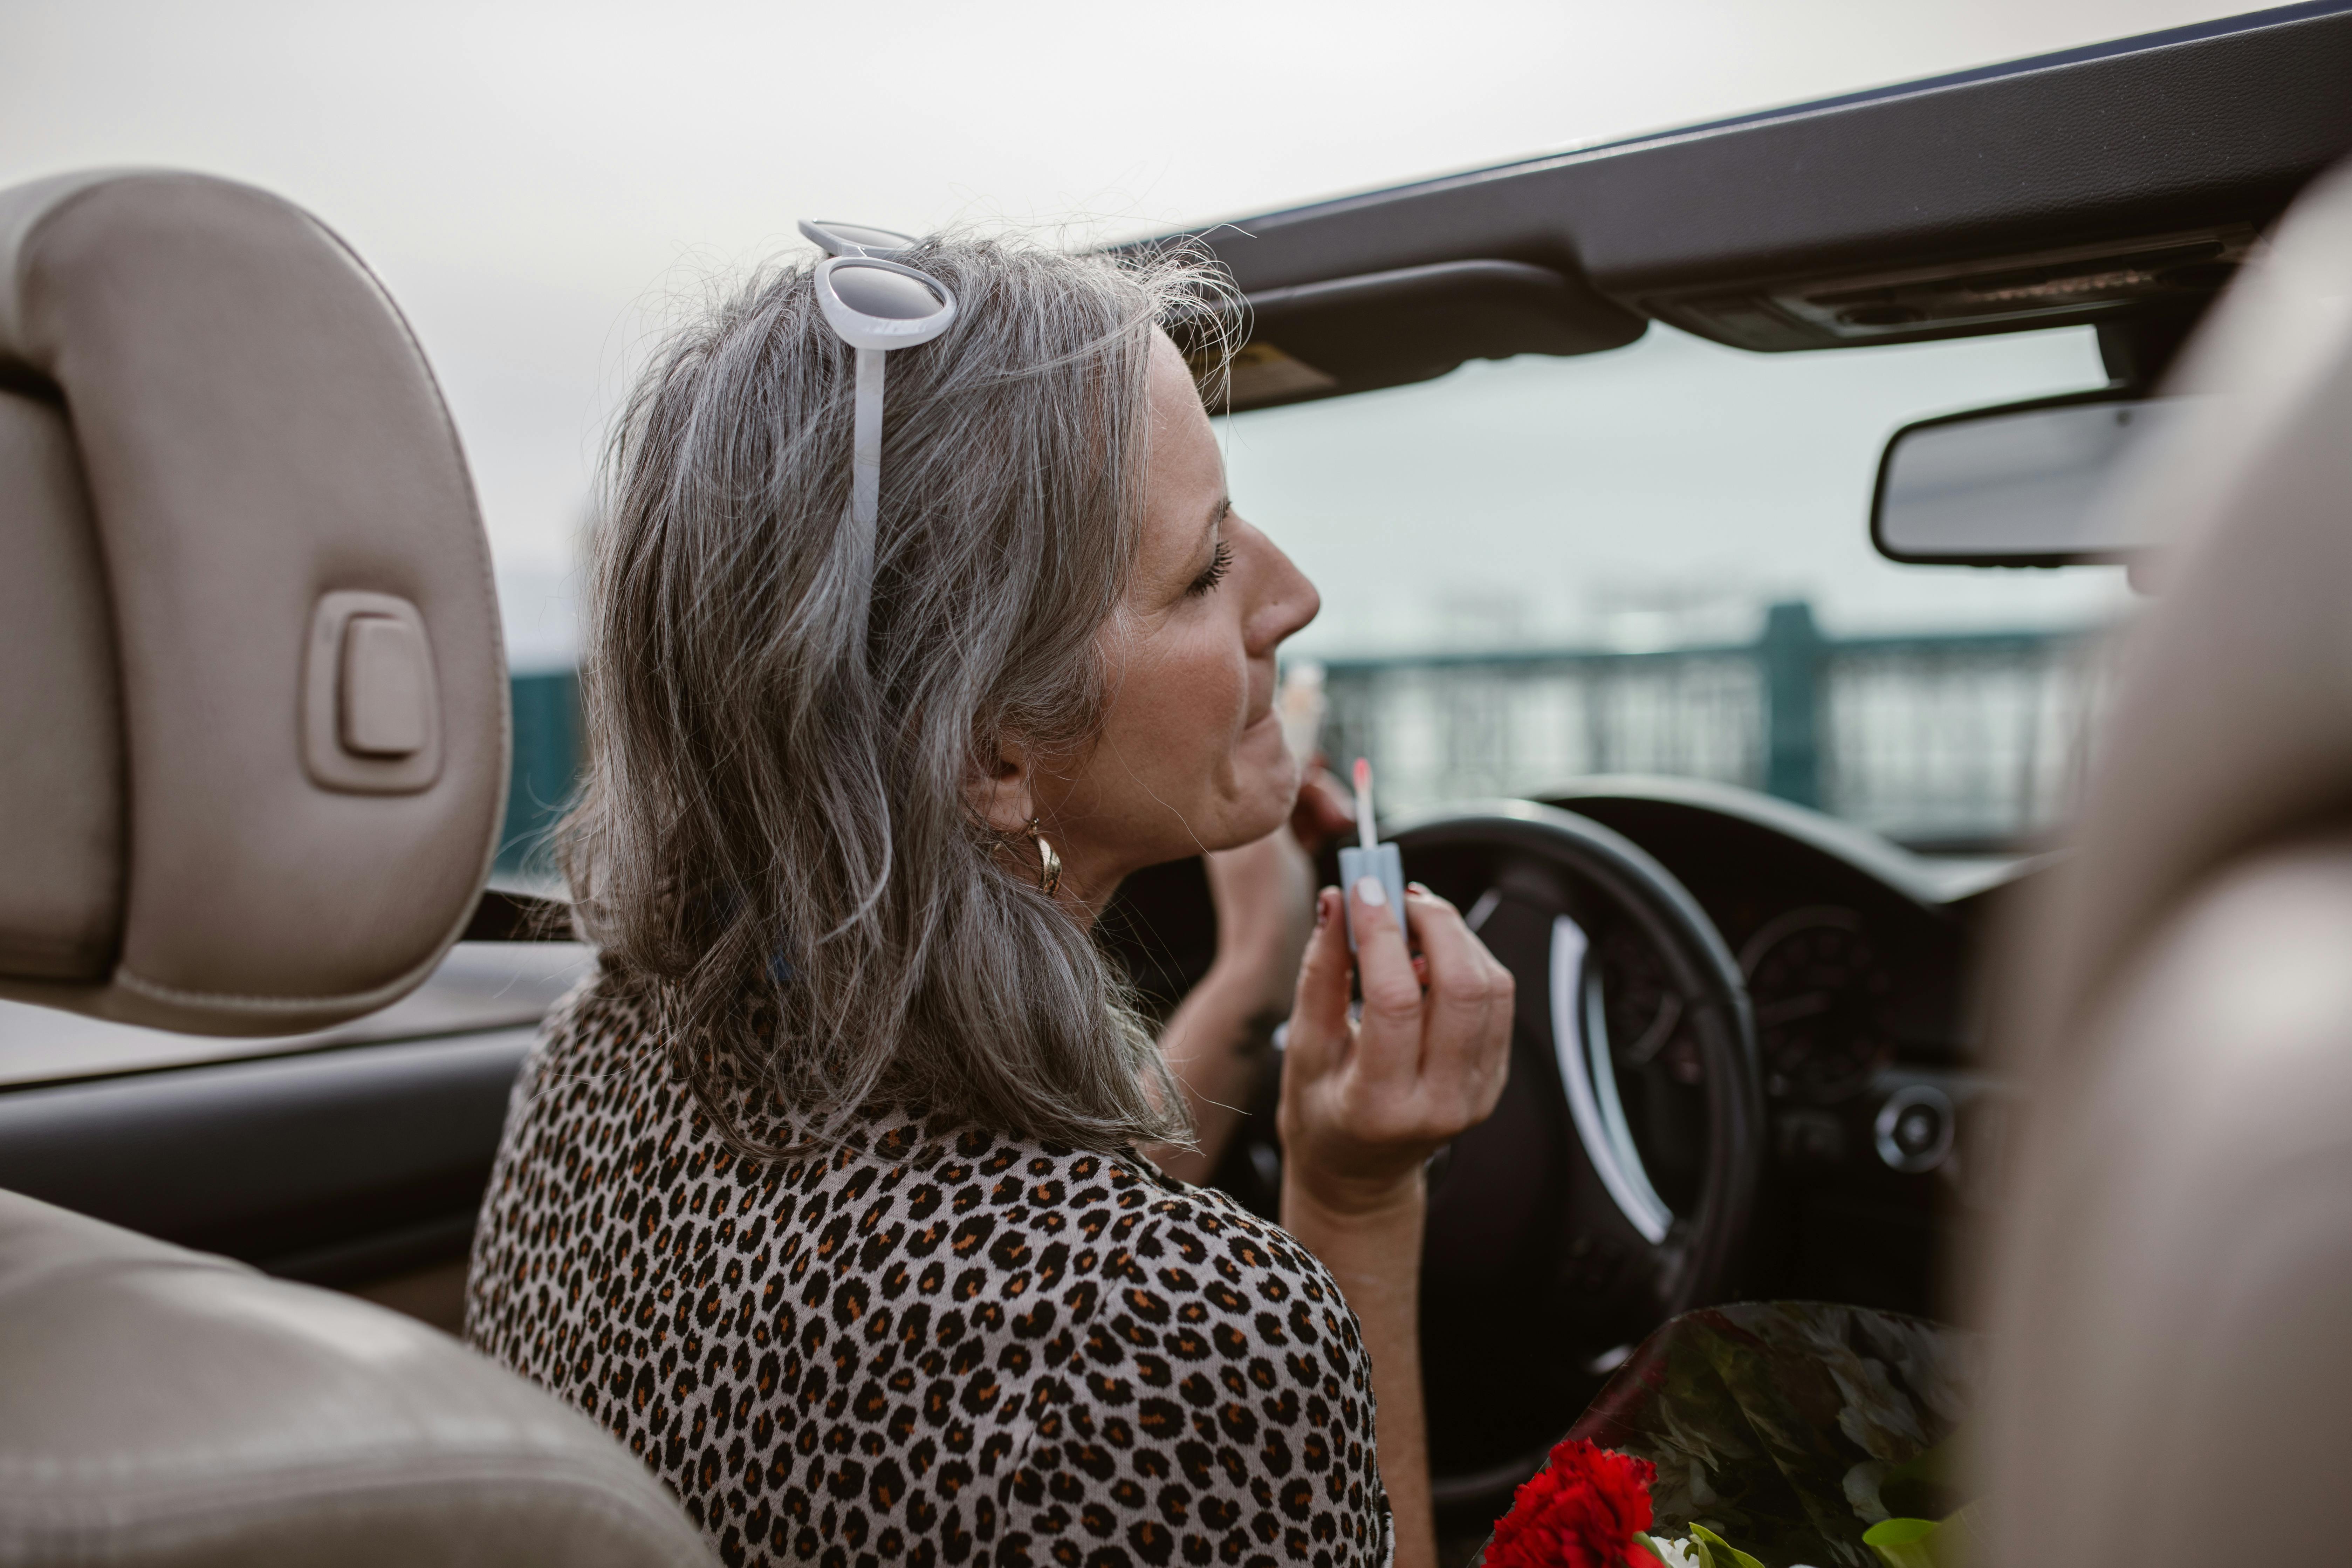 A woman applying lipstick while driving | Source: Pexels